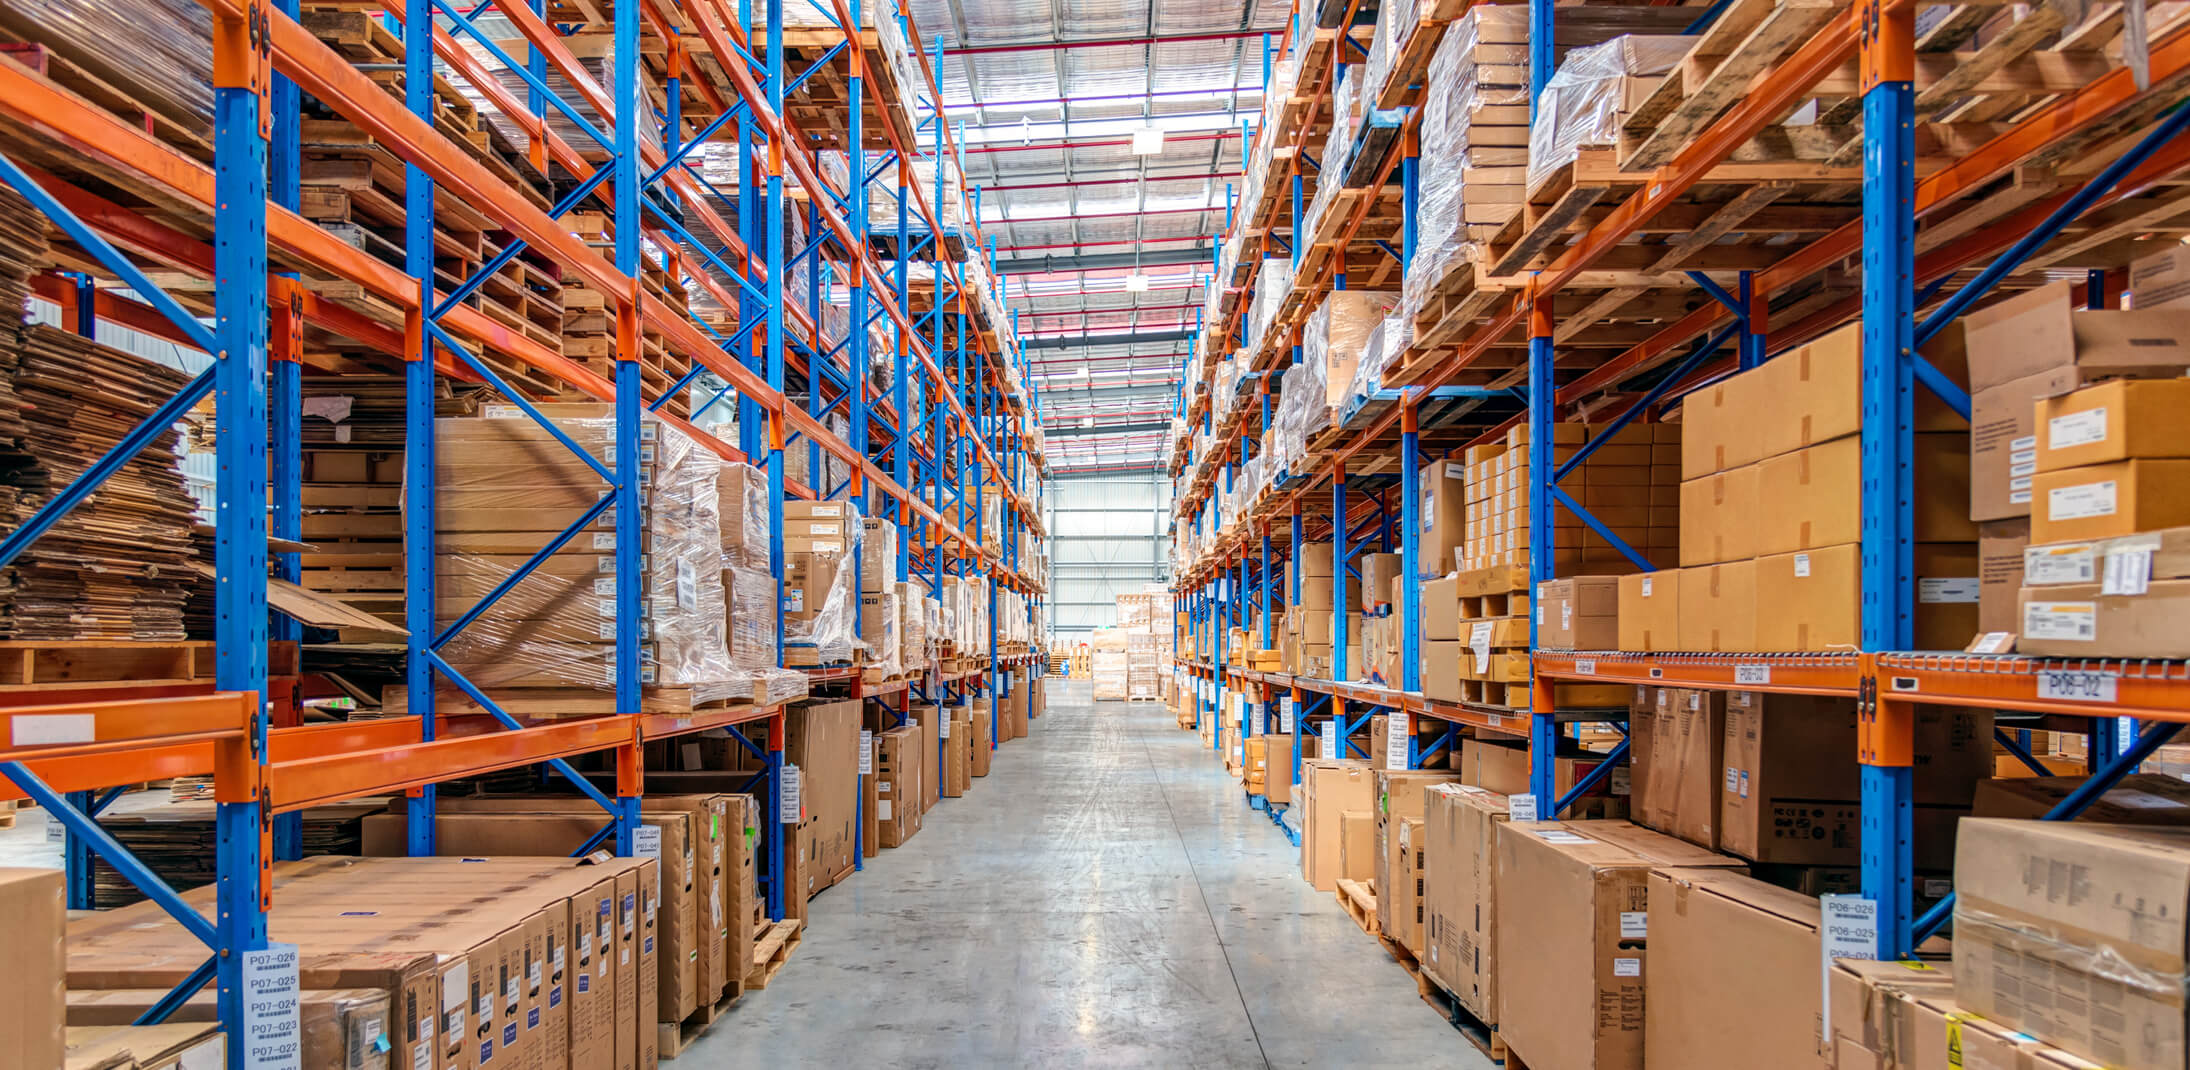 CBSA in Bonded Warehouse Operations